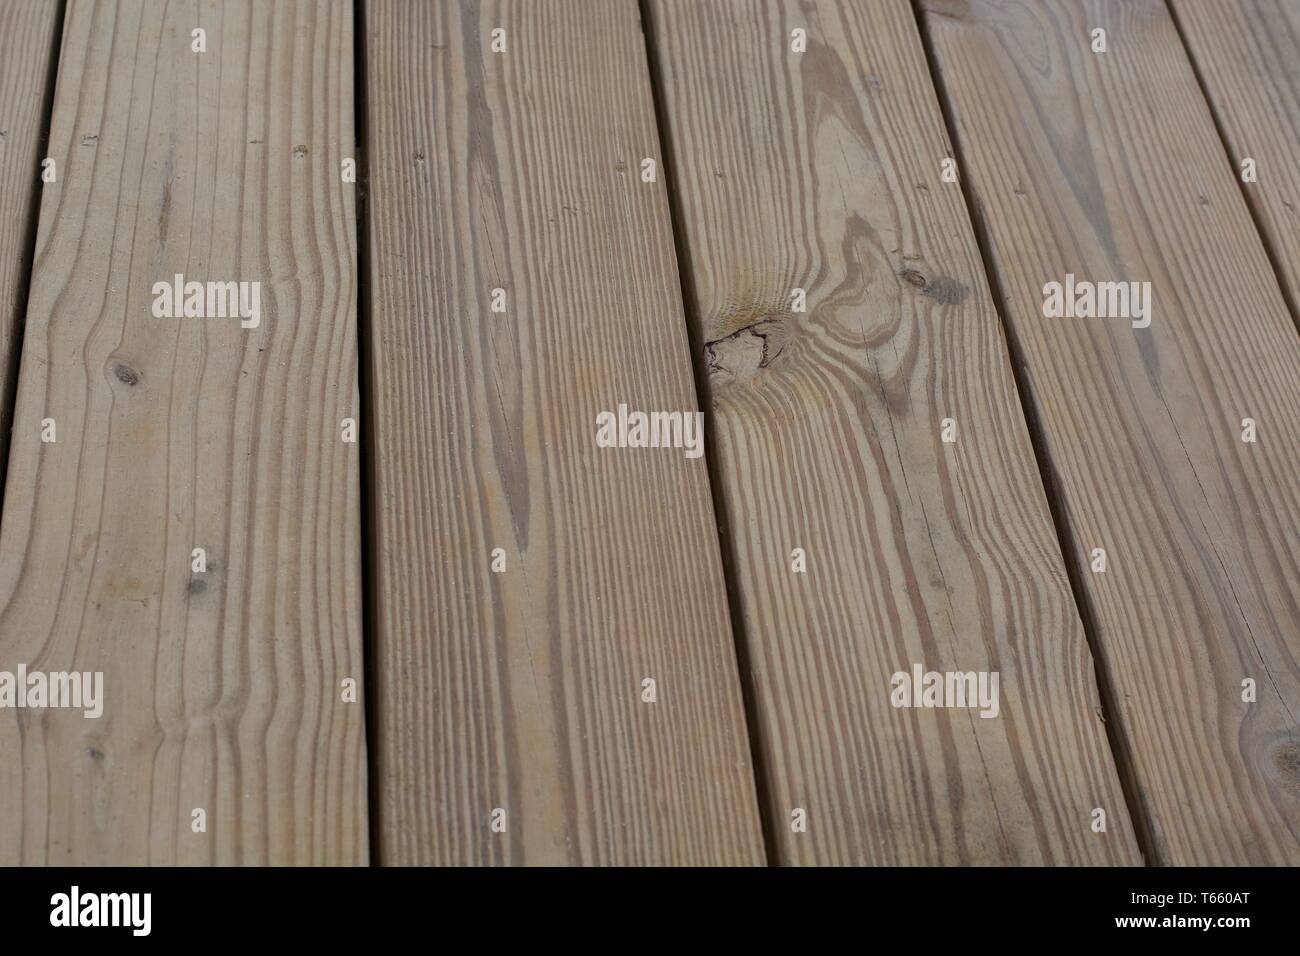 Wood Boards or Planks Stock Photo